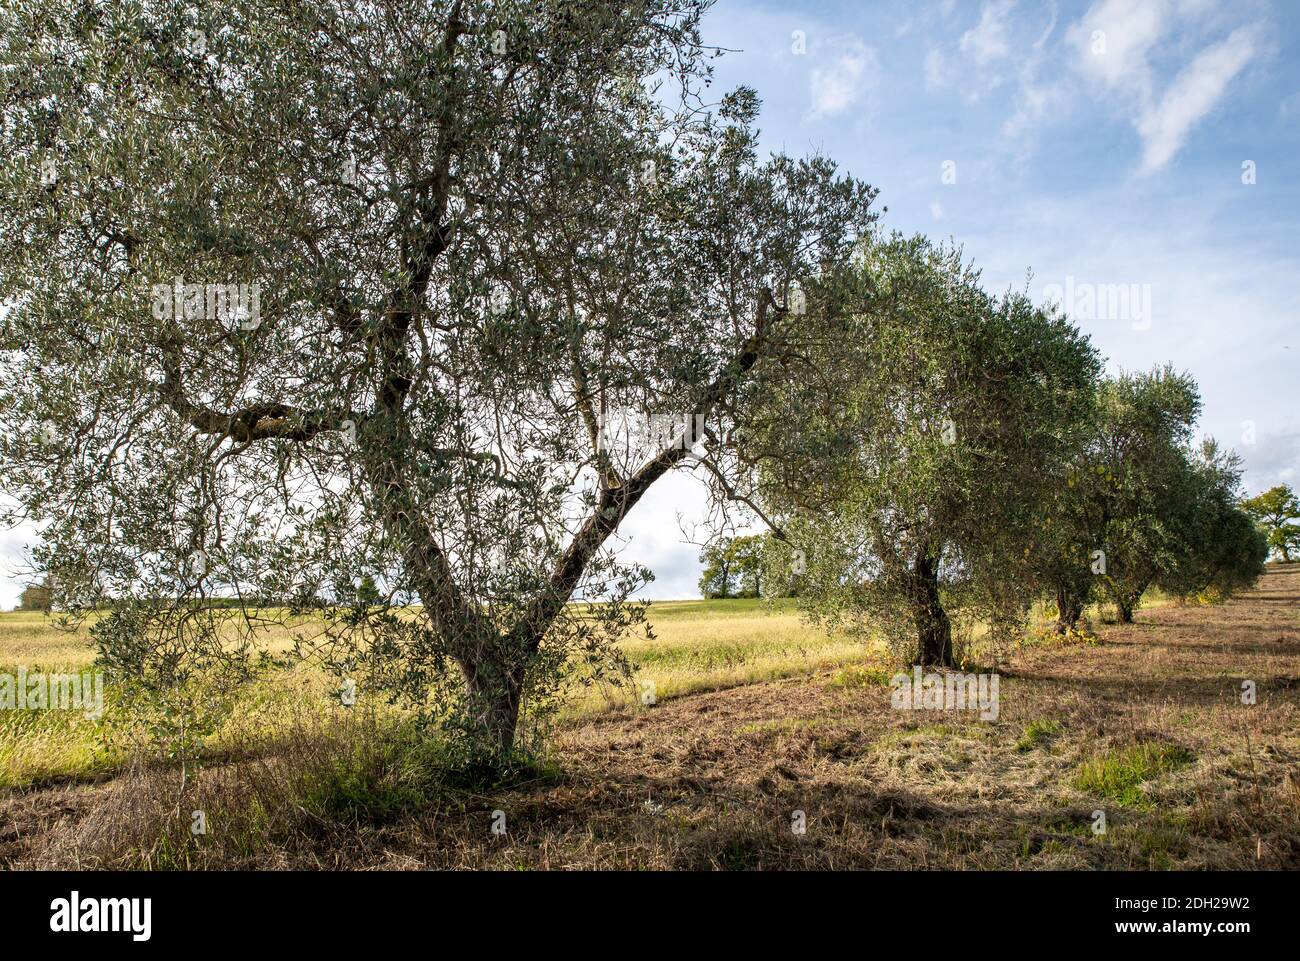 Olive trees in the Italian countryside Stock Photo